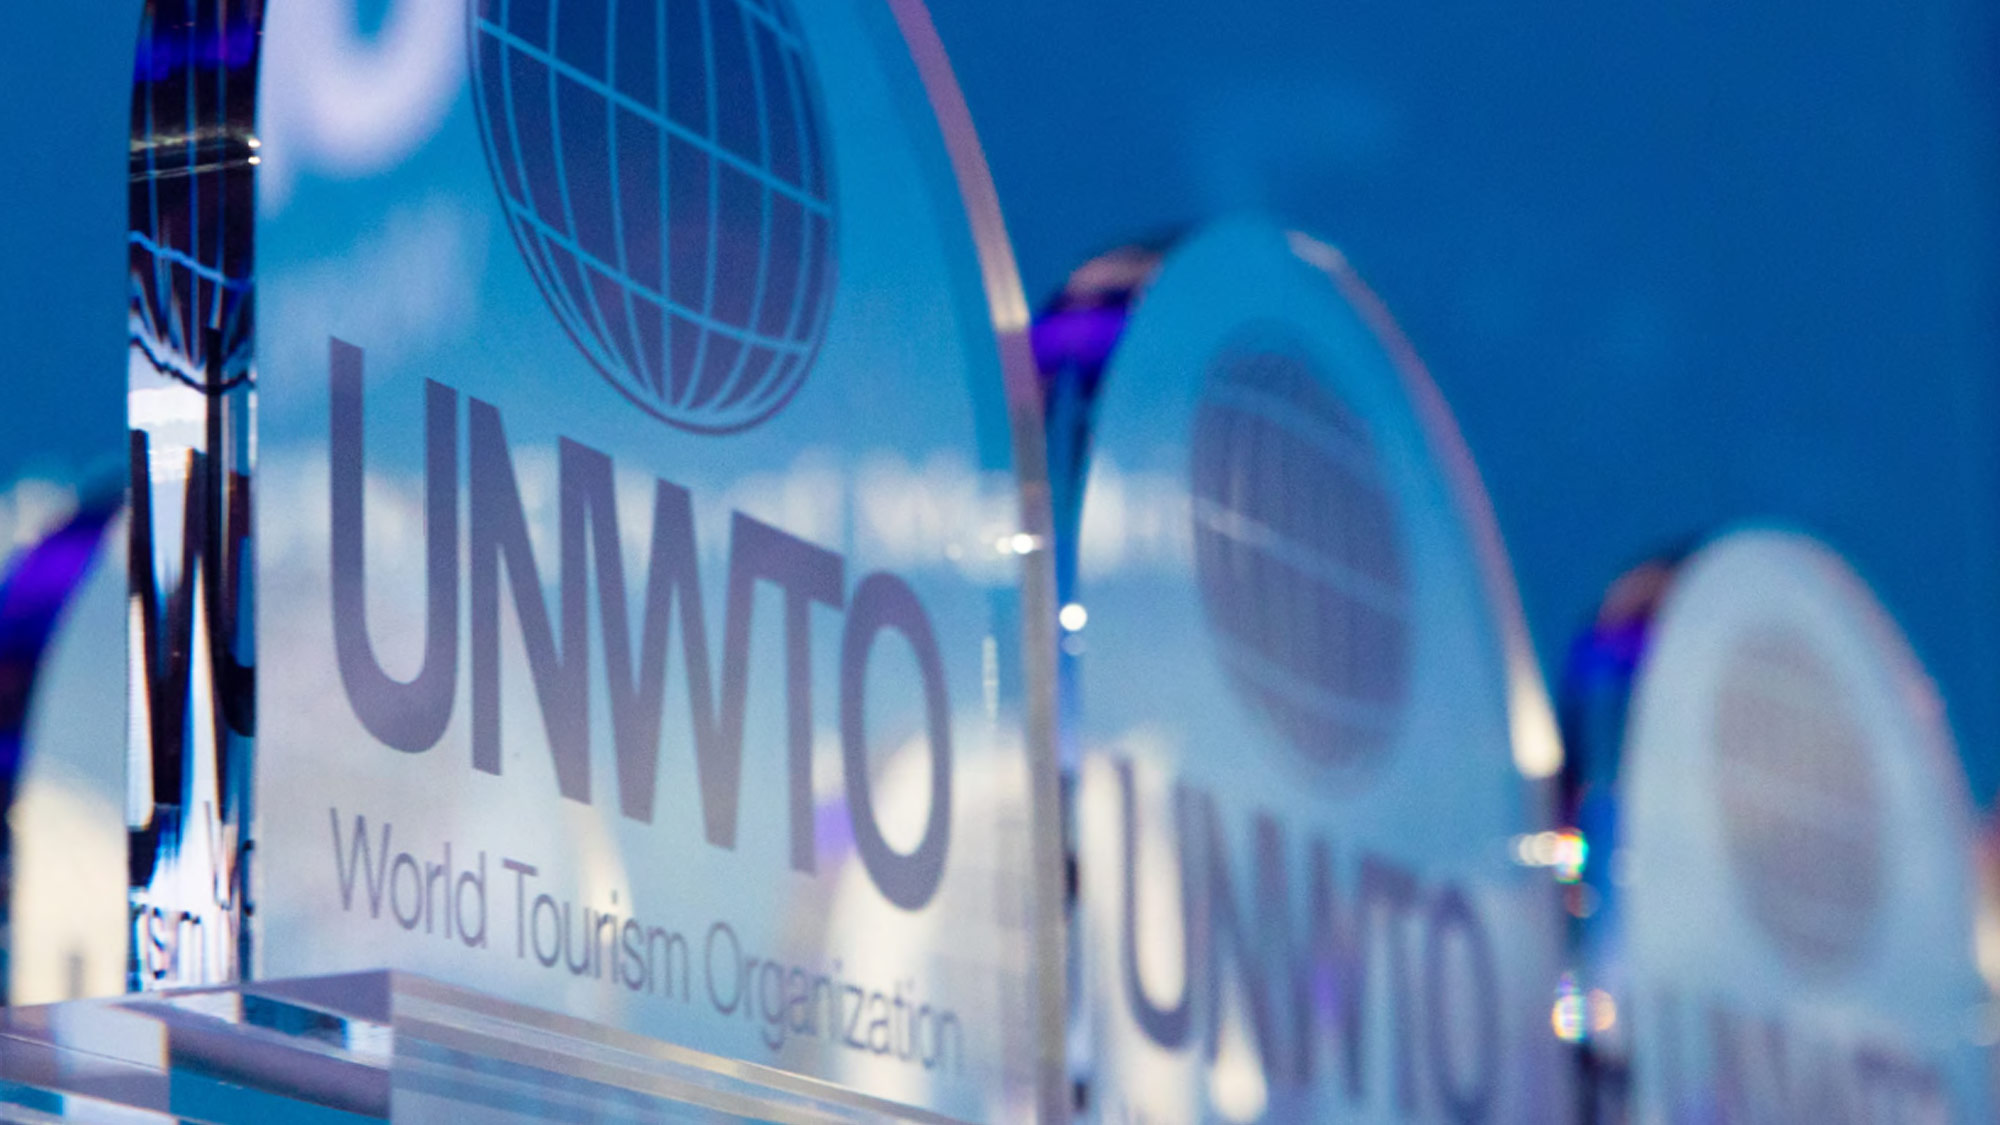 Kenya Secures Chairmanship of UN World Tourism Organisation (UNWTO) Committee